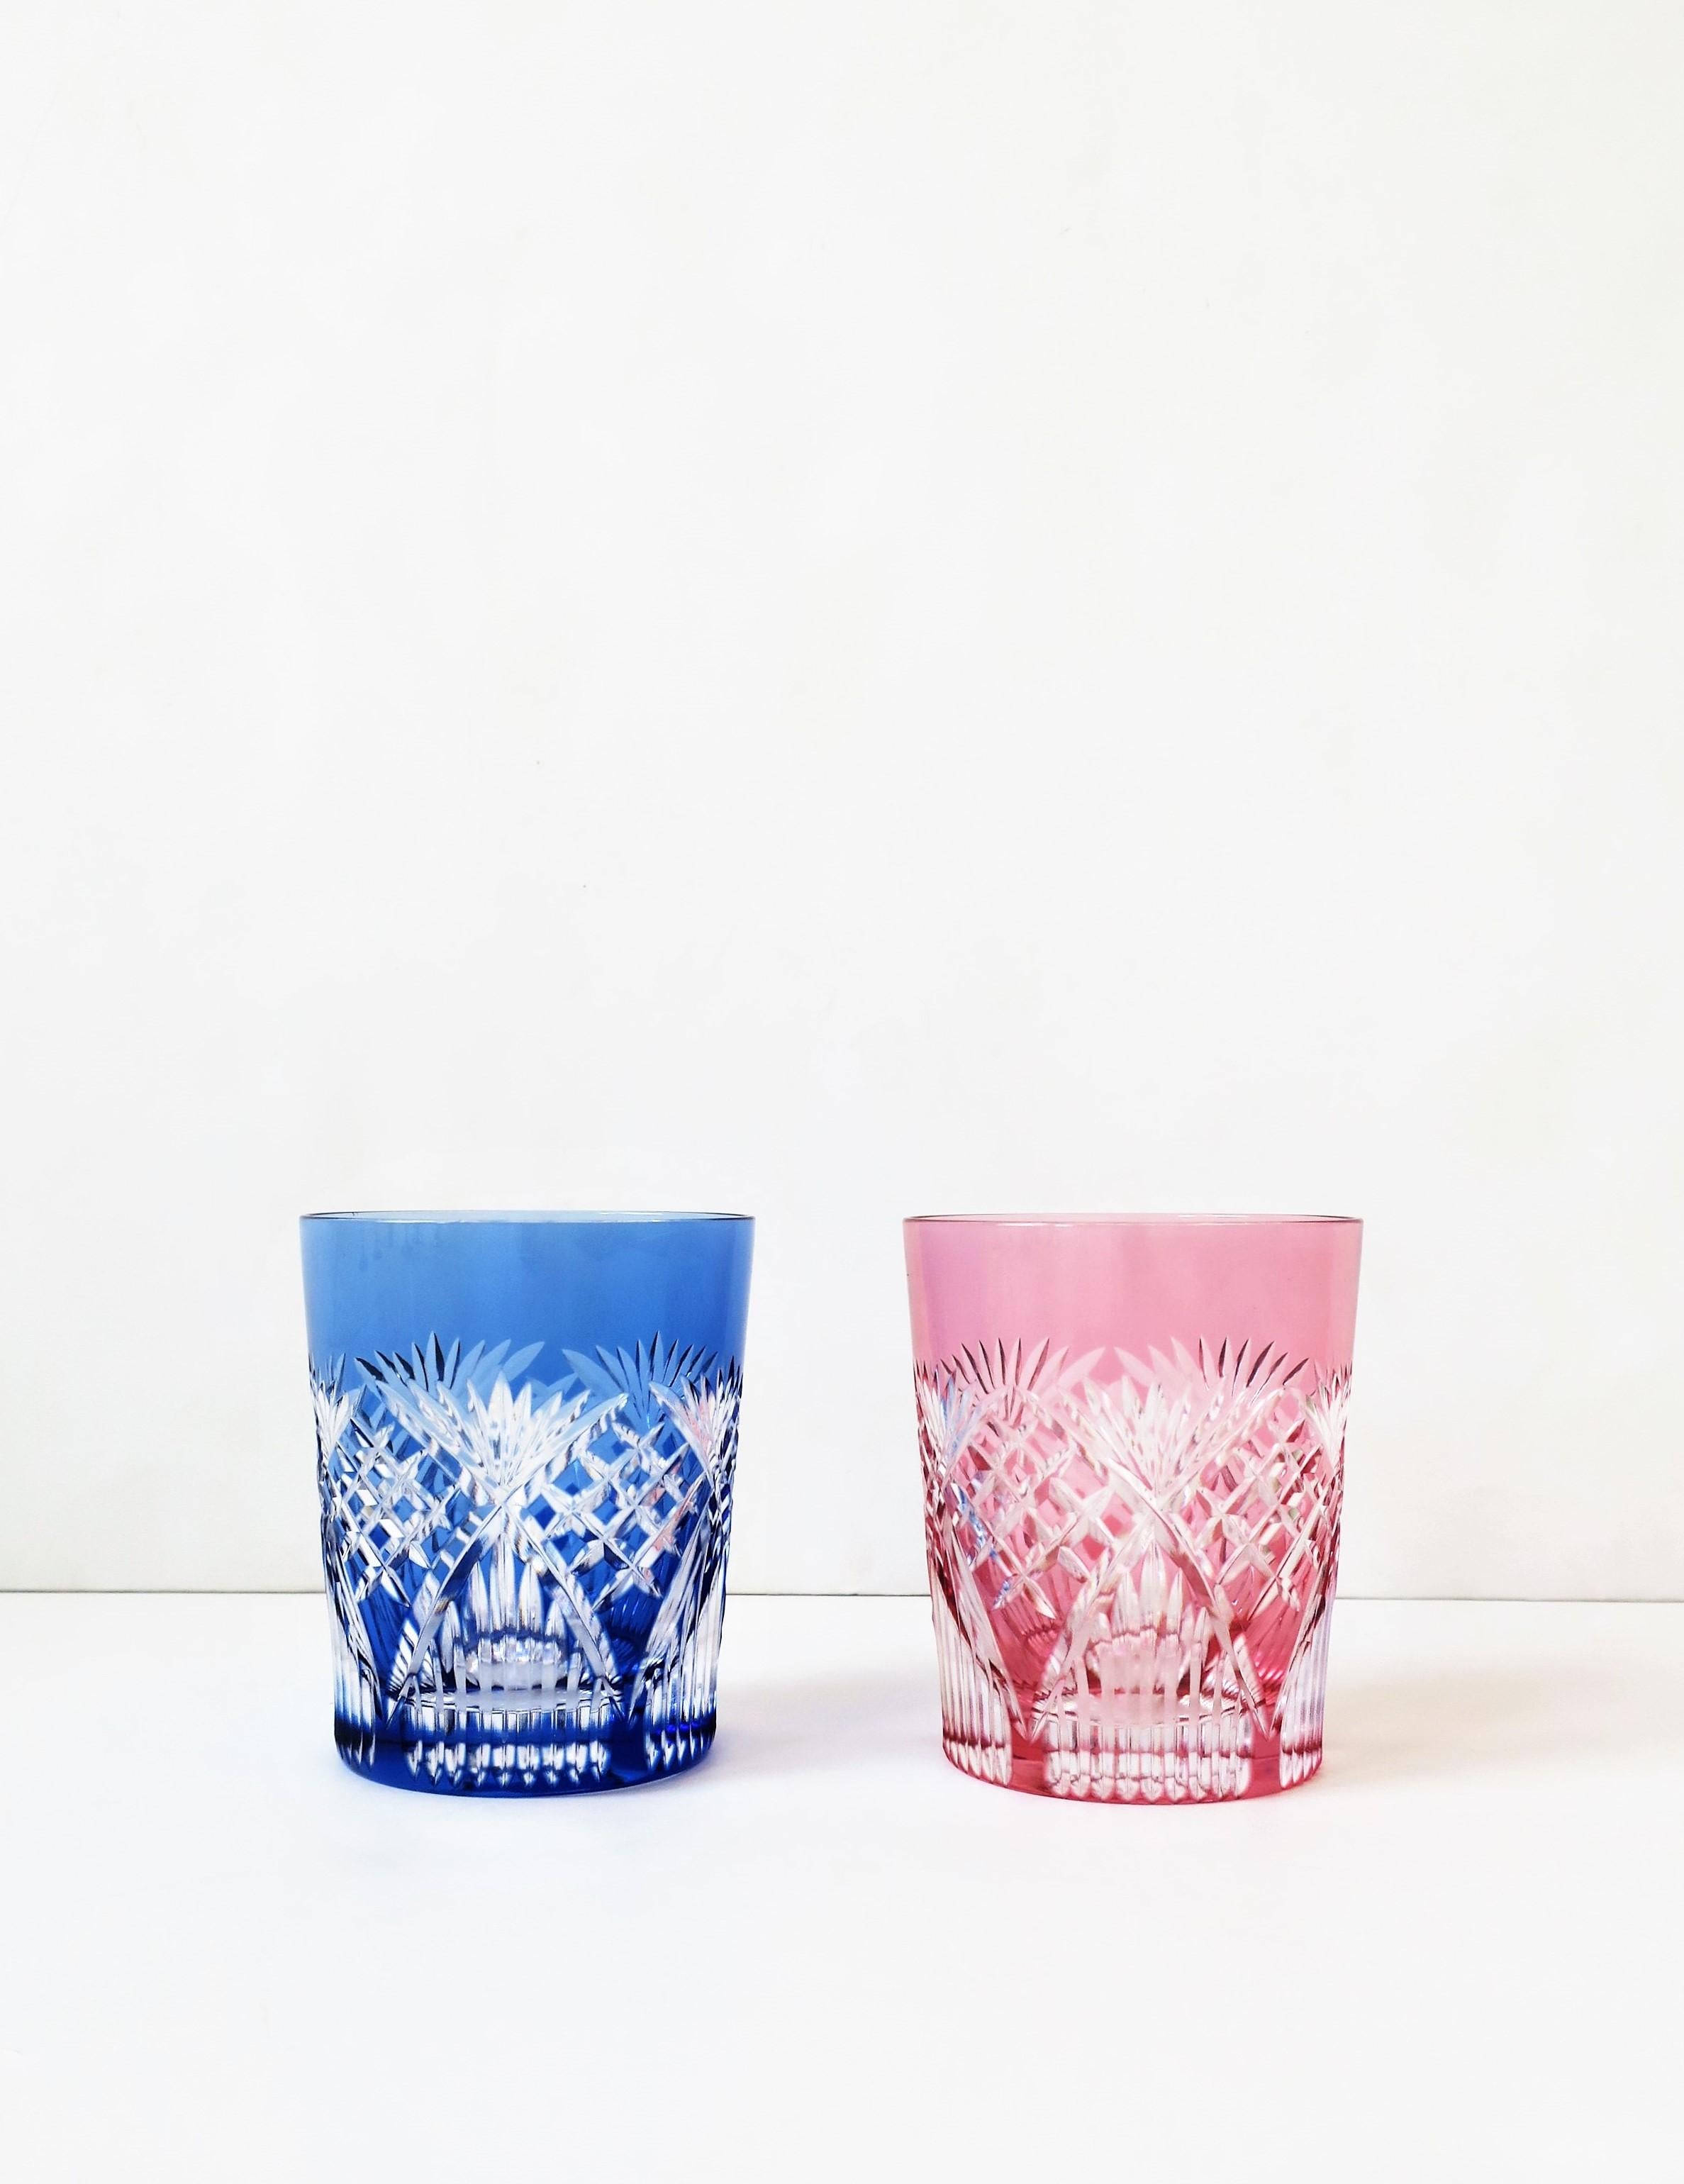 A very beautiful set of two (2) handcrafted cut crystal rocks' cocktail or whisky/whiskey glasses from luxury maker Kagami, Japan, circa 21st century. Beautiful handmade cut crystal rocks glasses in blue/clear and pink/clear. A great set for